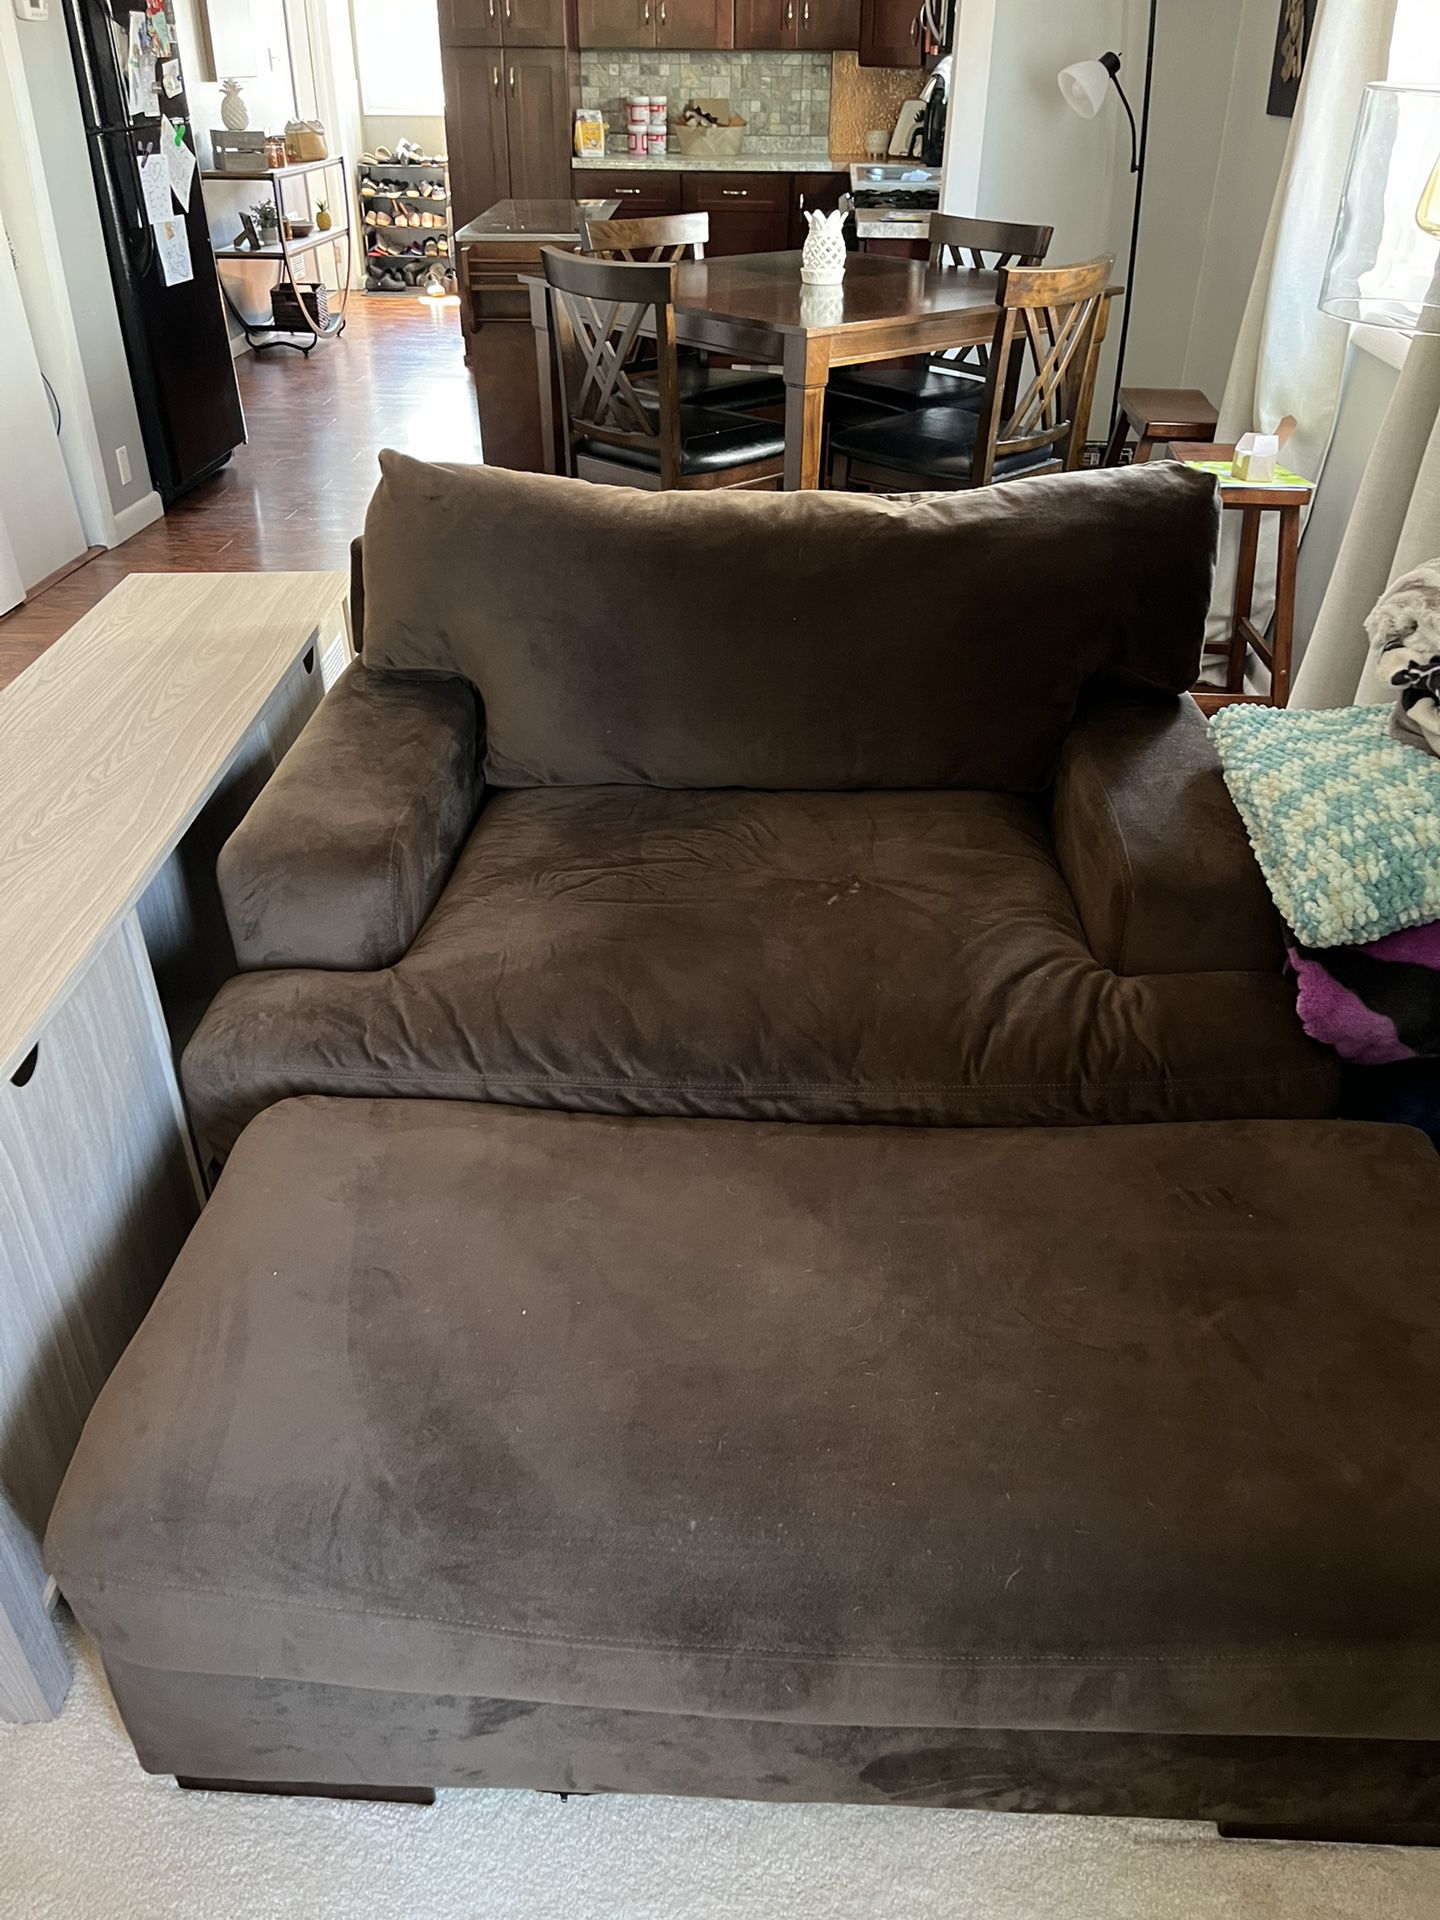 Chair, Ottoman And Couch